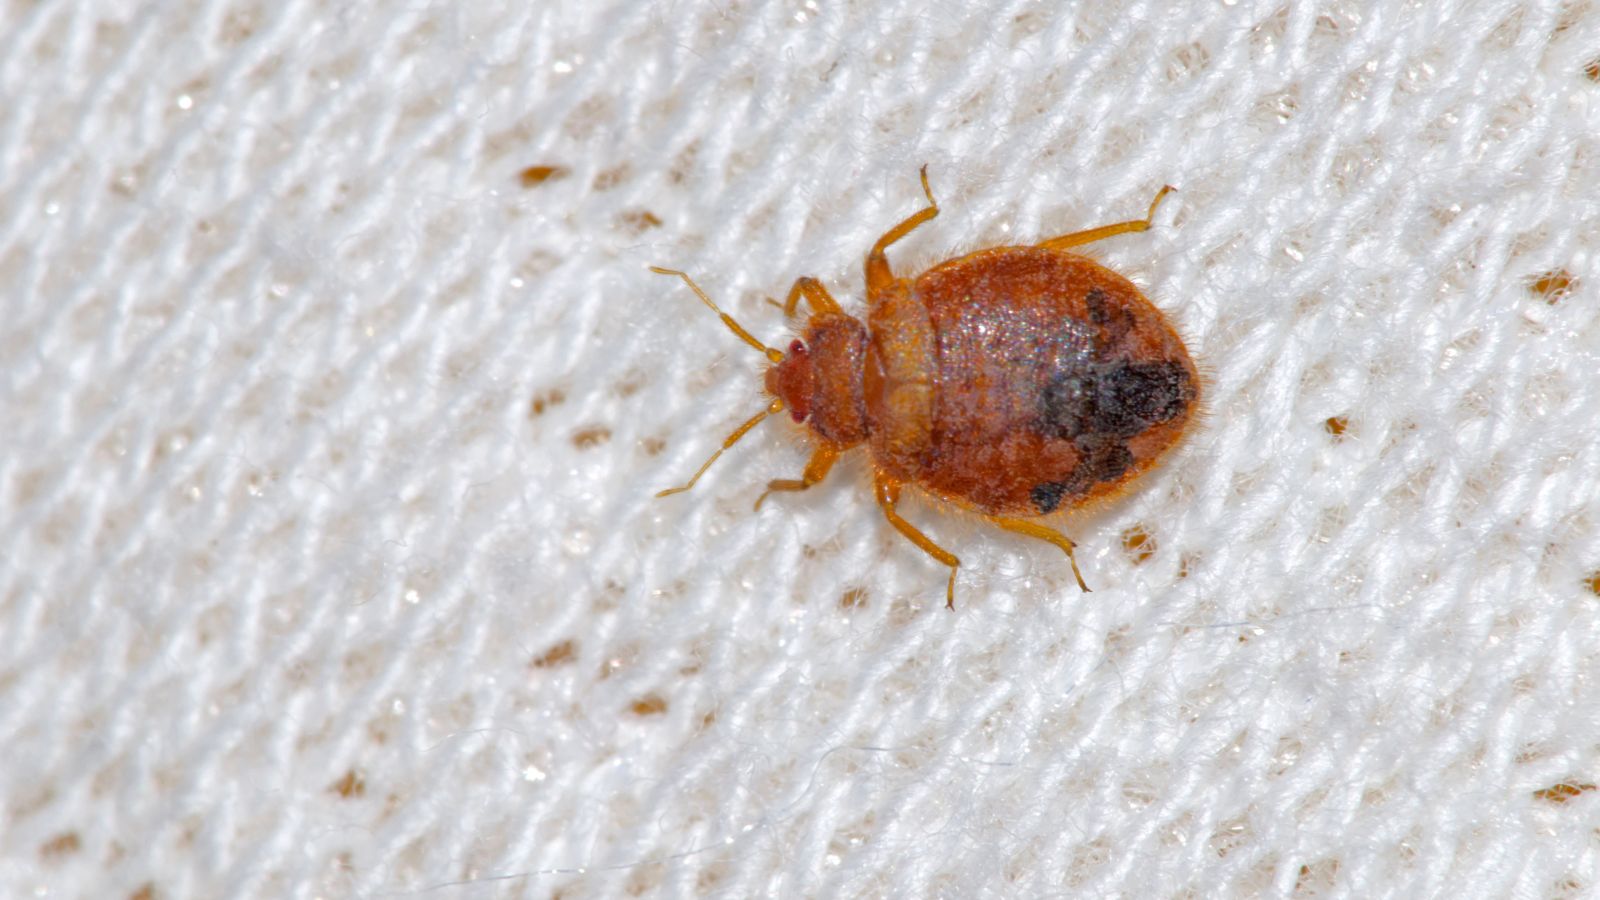 Getting Rid Of Bed Bugs The Non-Toxic Way